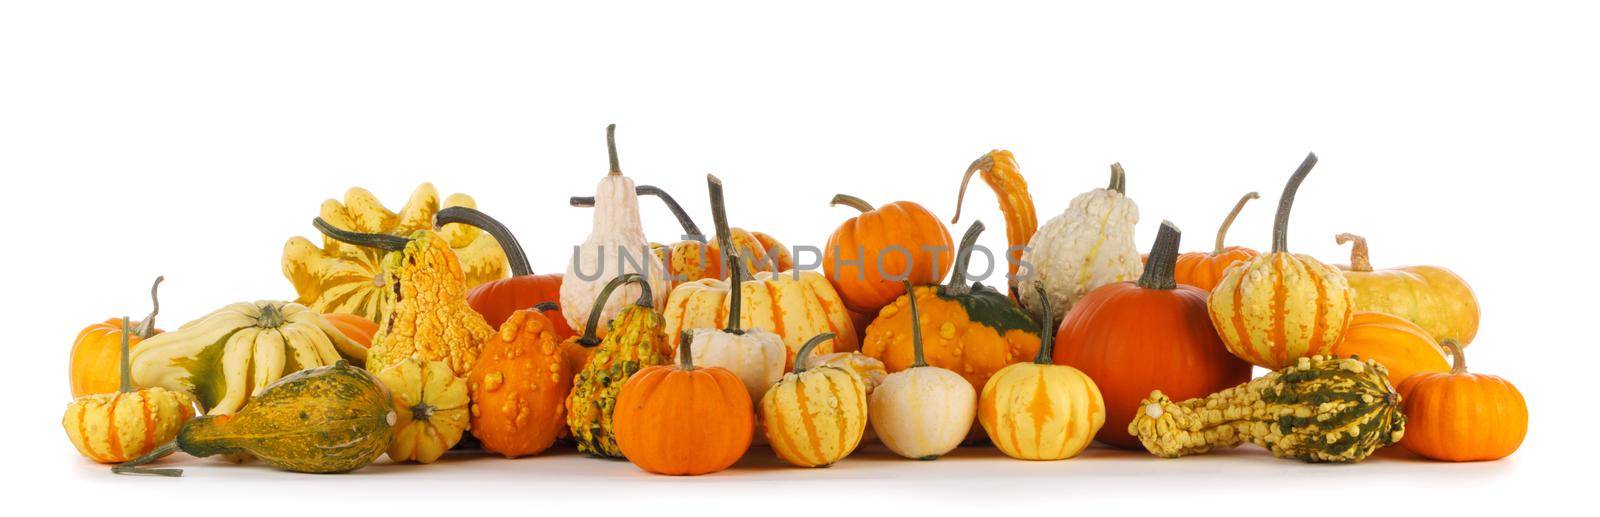 Harvested pumpkins isolated on white background by Yellowj